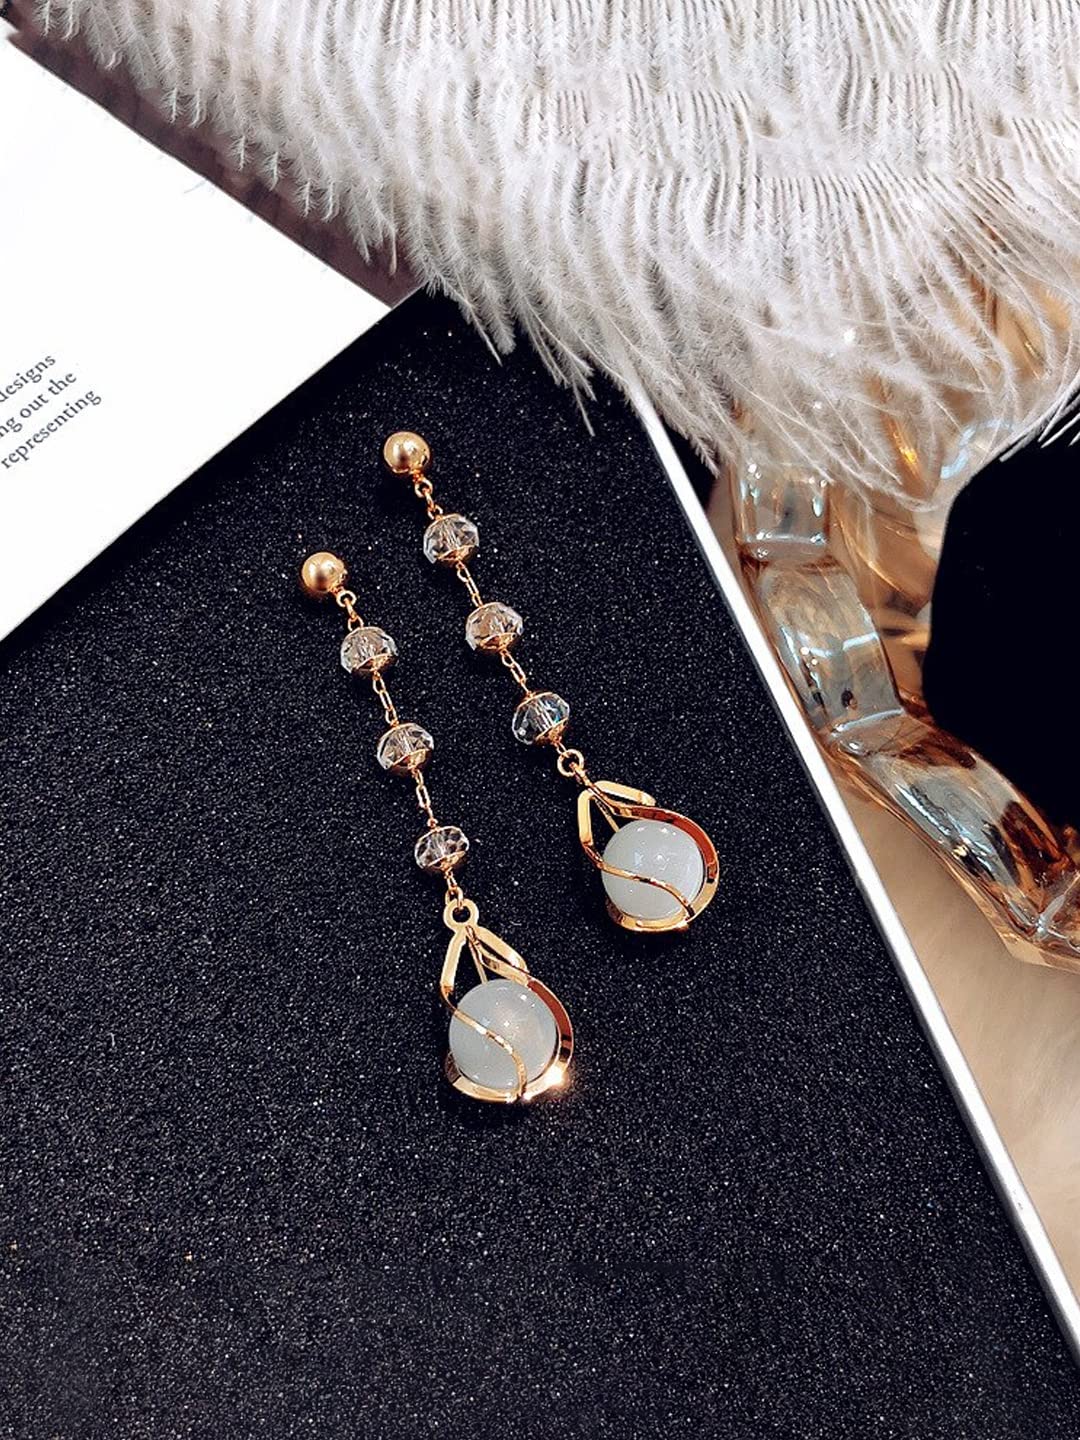 Yellow Chimes Earrings For Women Gold Tone Round Crystal Drop Dangle Earrings For Women and Girls